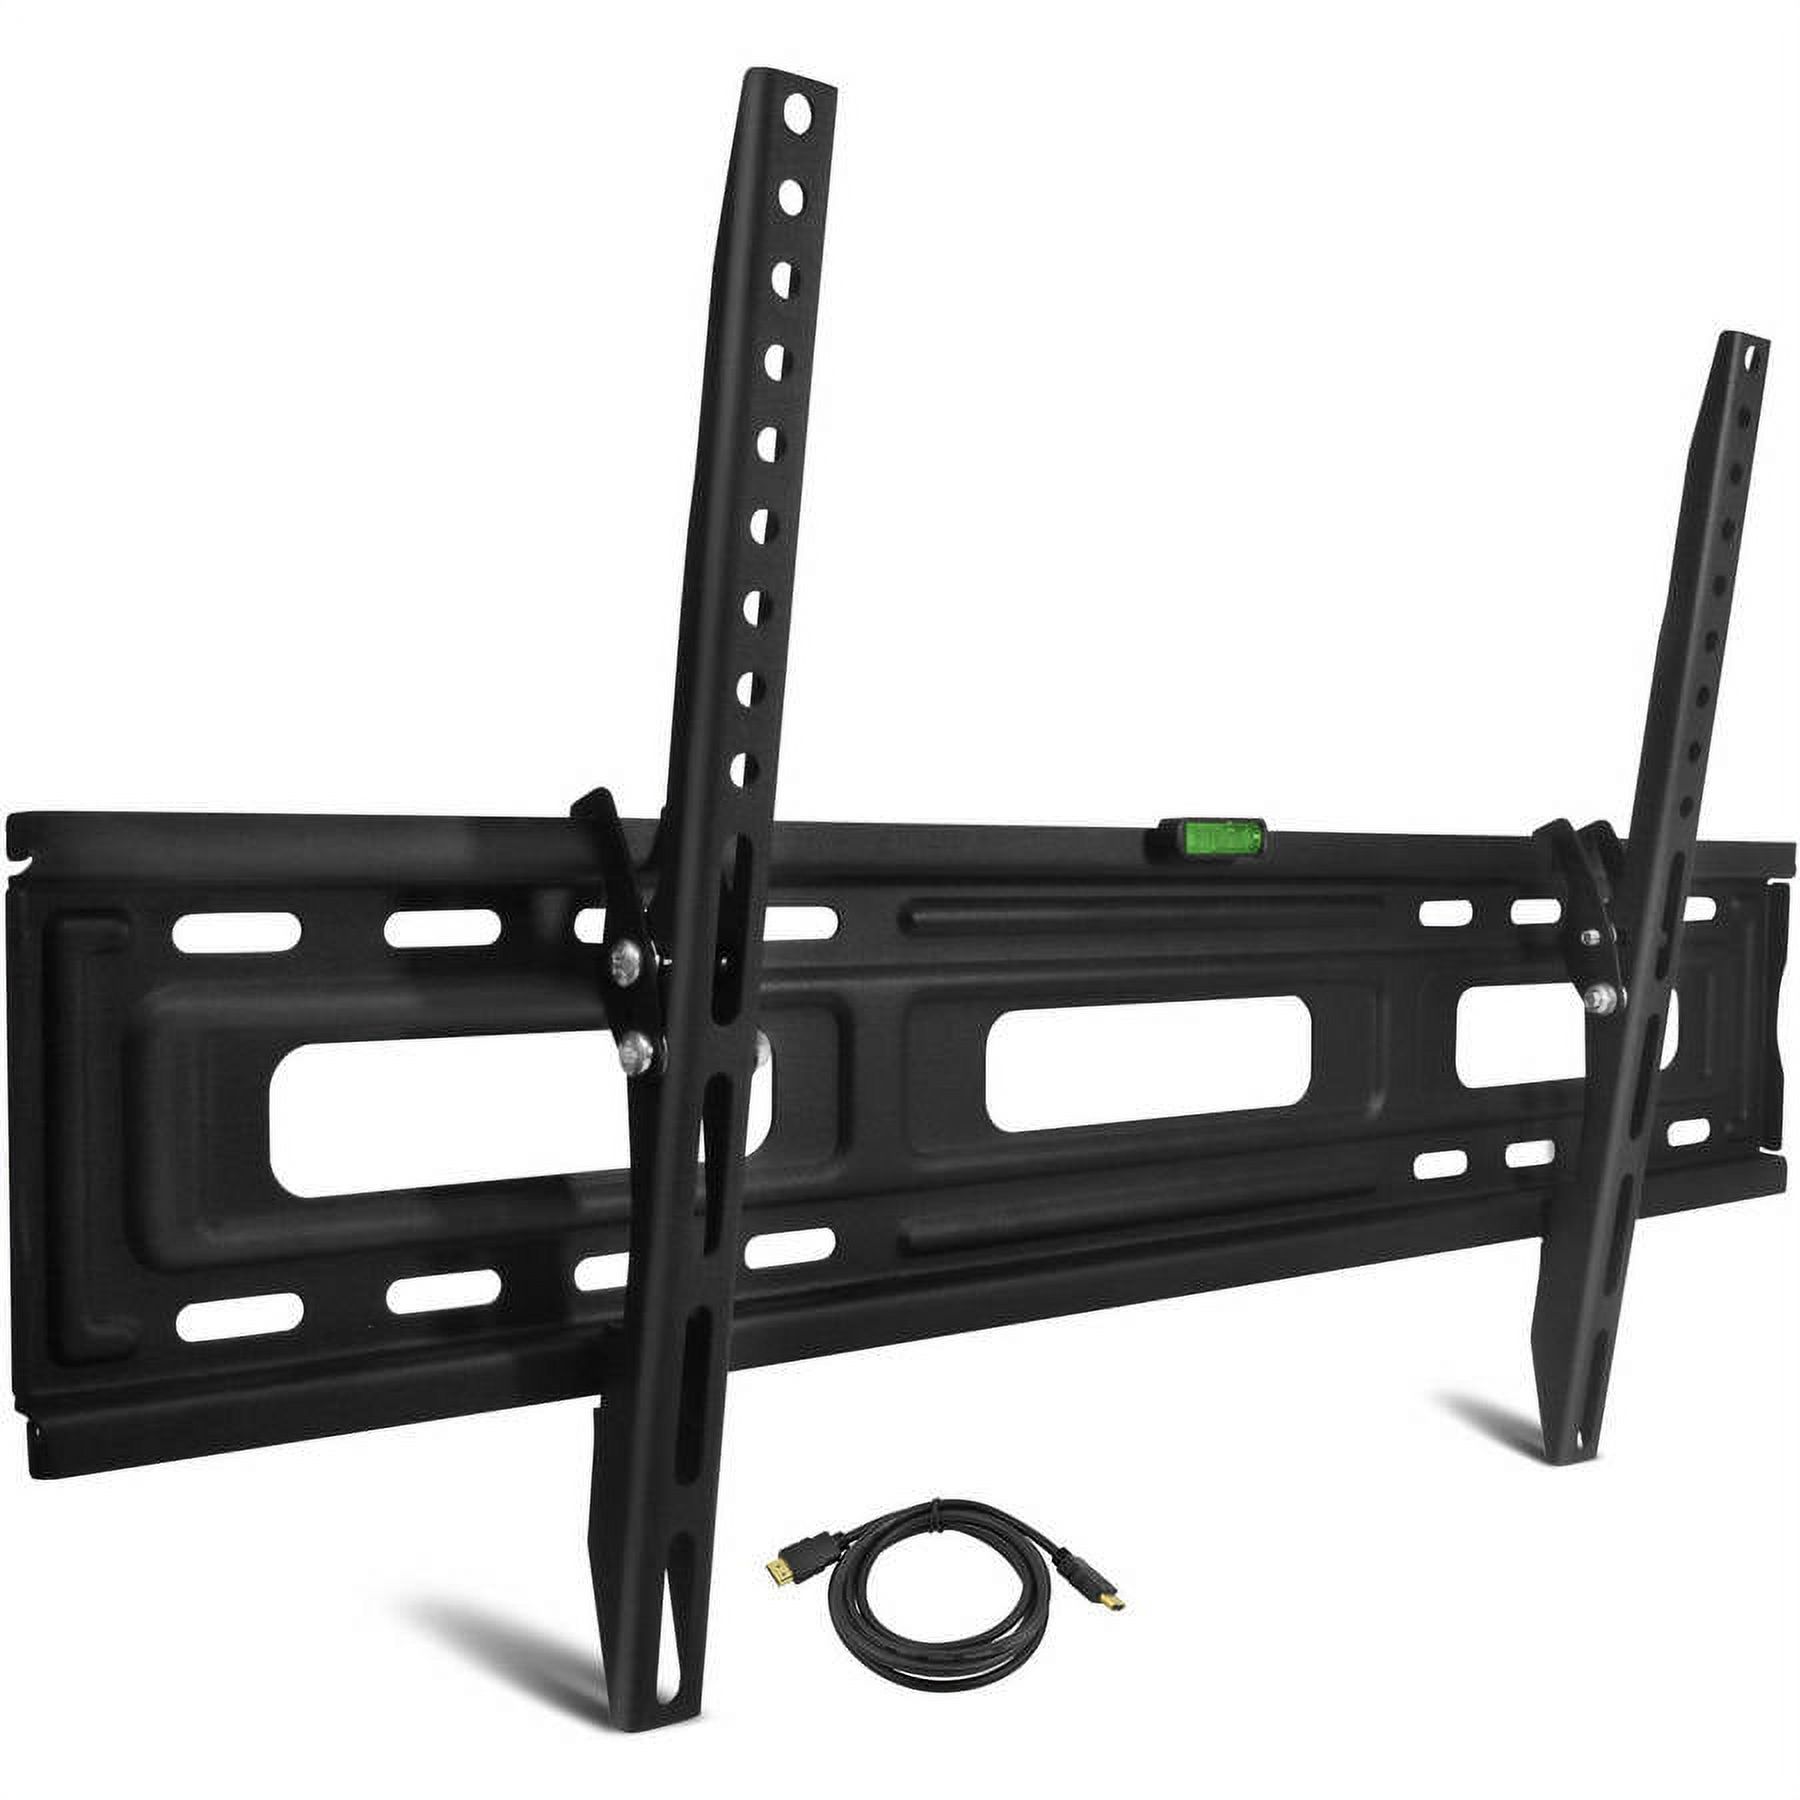 DuraPro Tilting Wall Mount Kit for 24" to 84" TVs + Bonus HDMI Cable (DRP790TT) - image 1 of 8